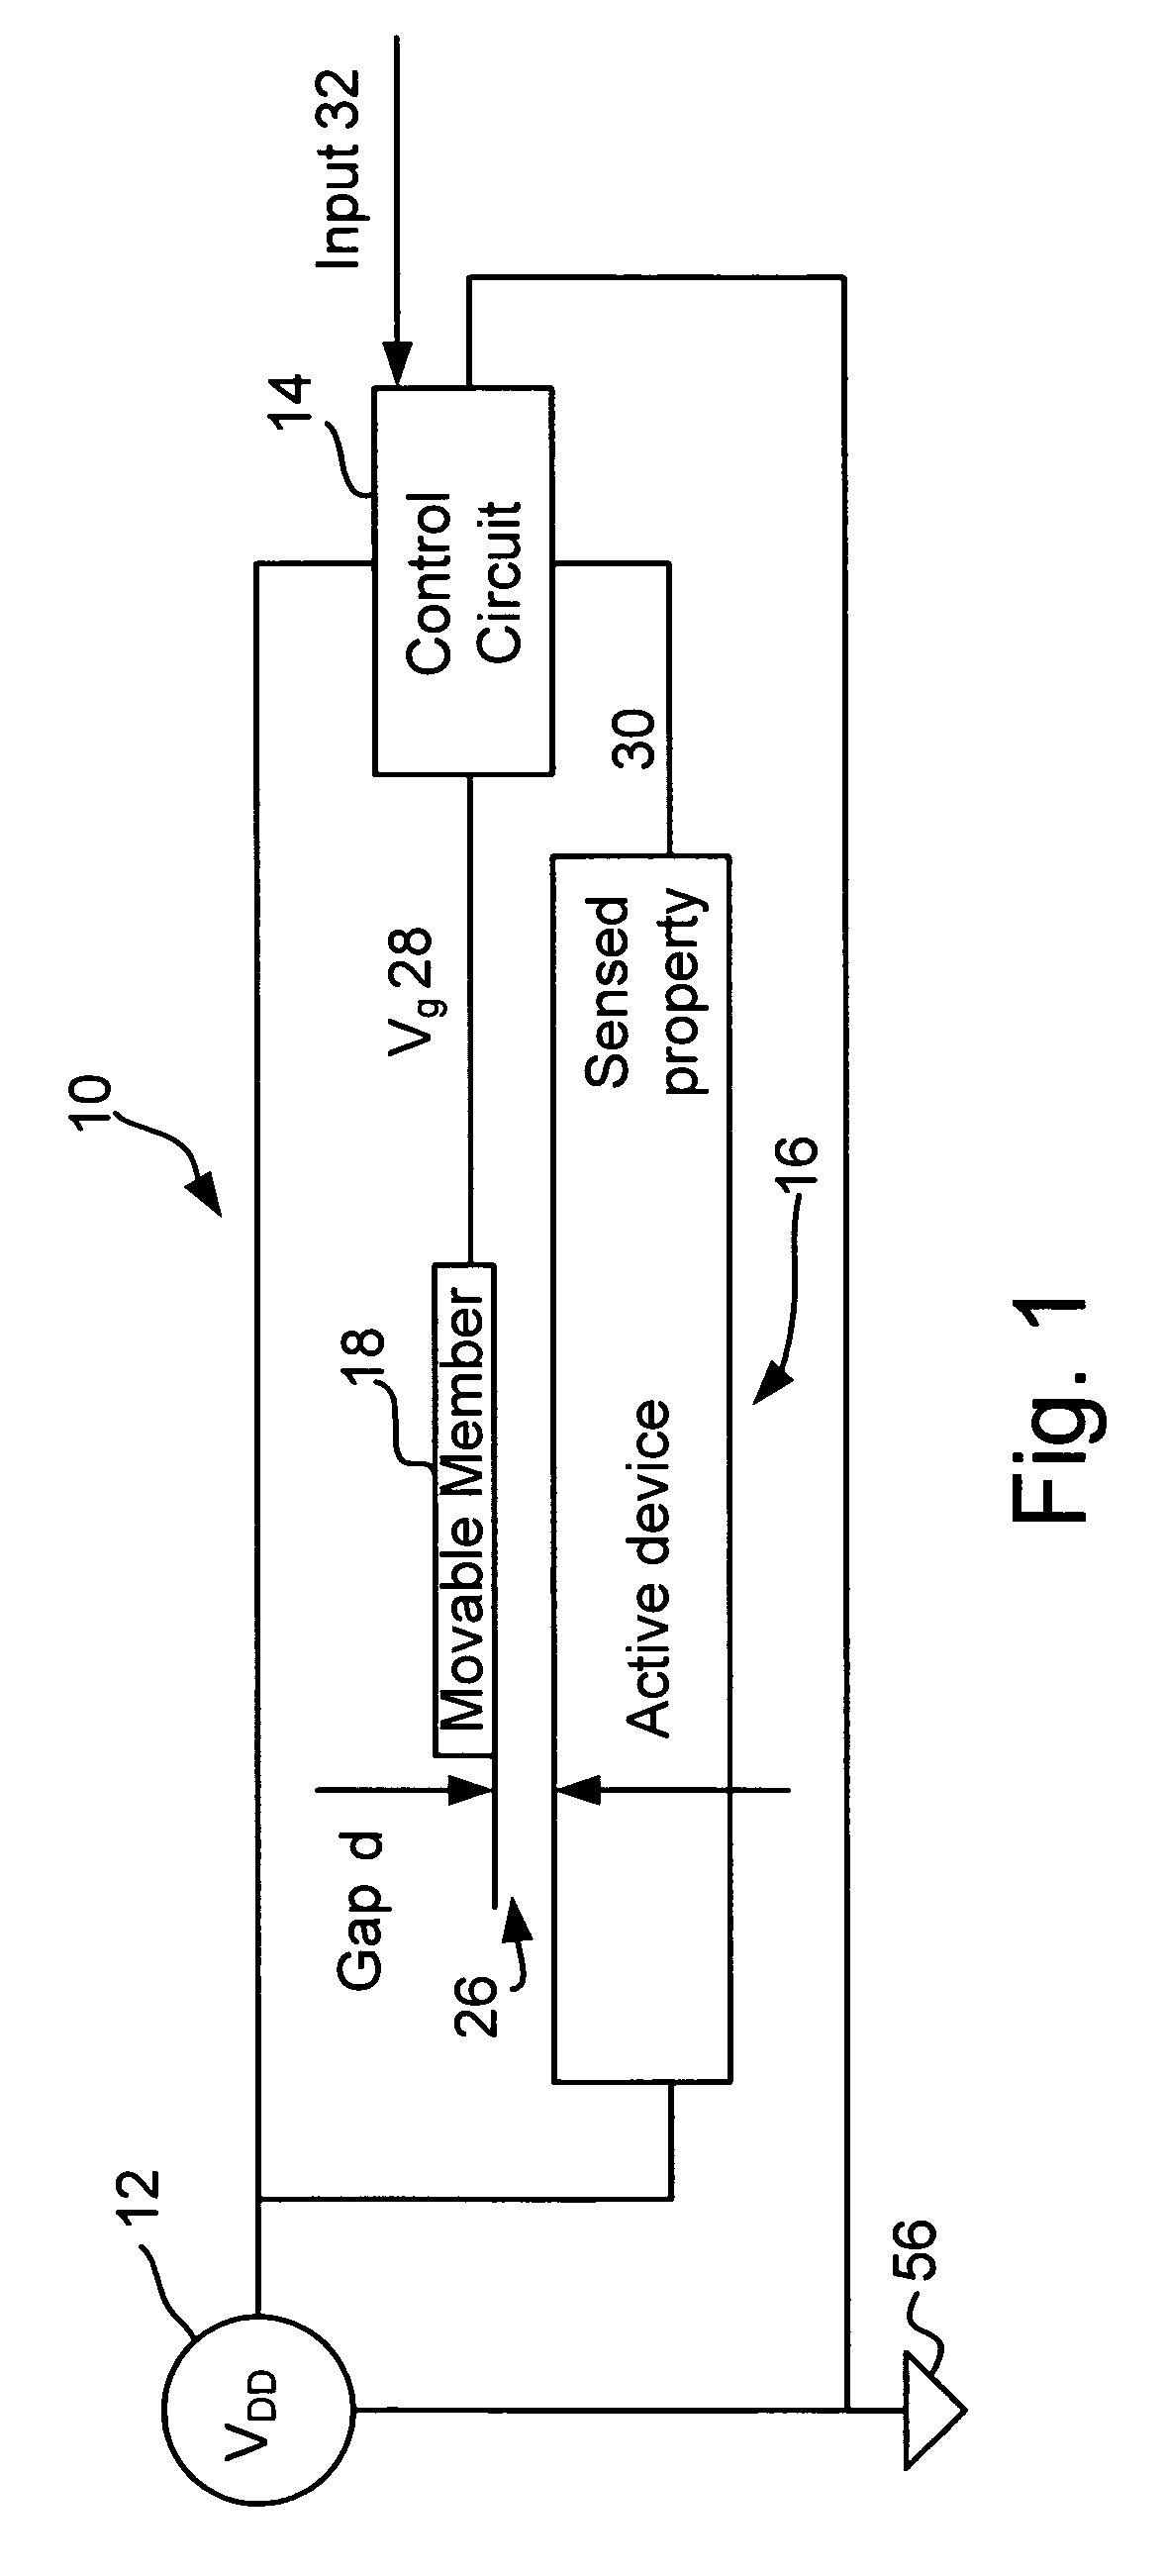 MEMs device with feedback control